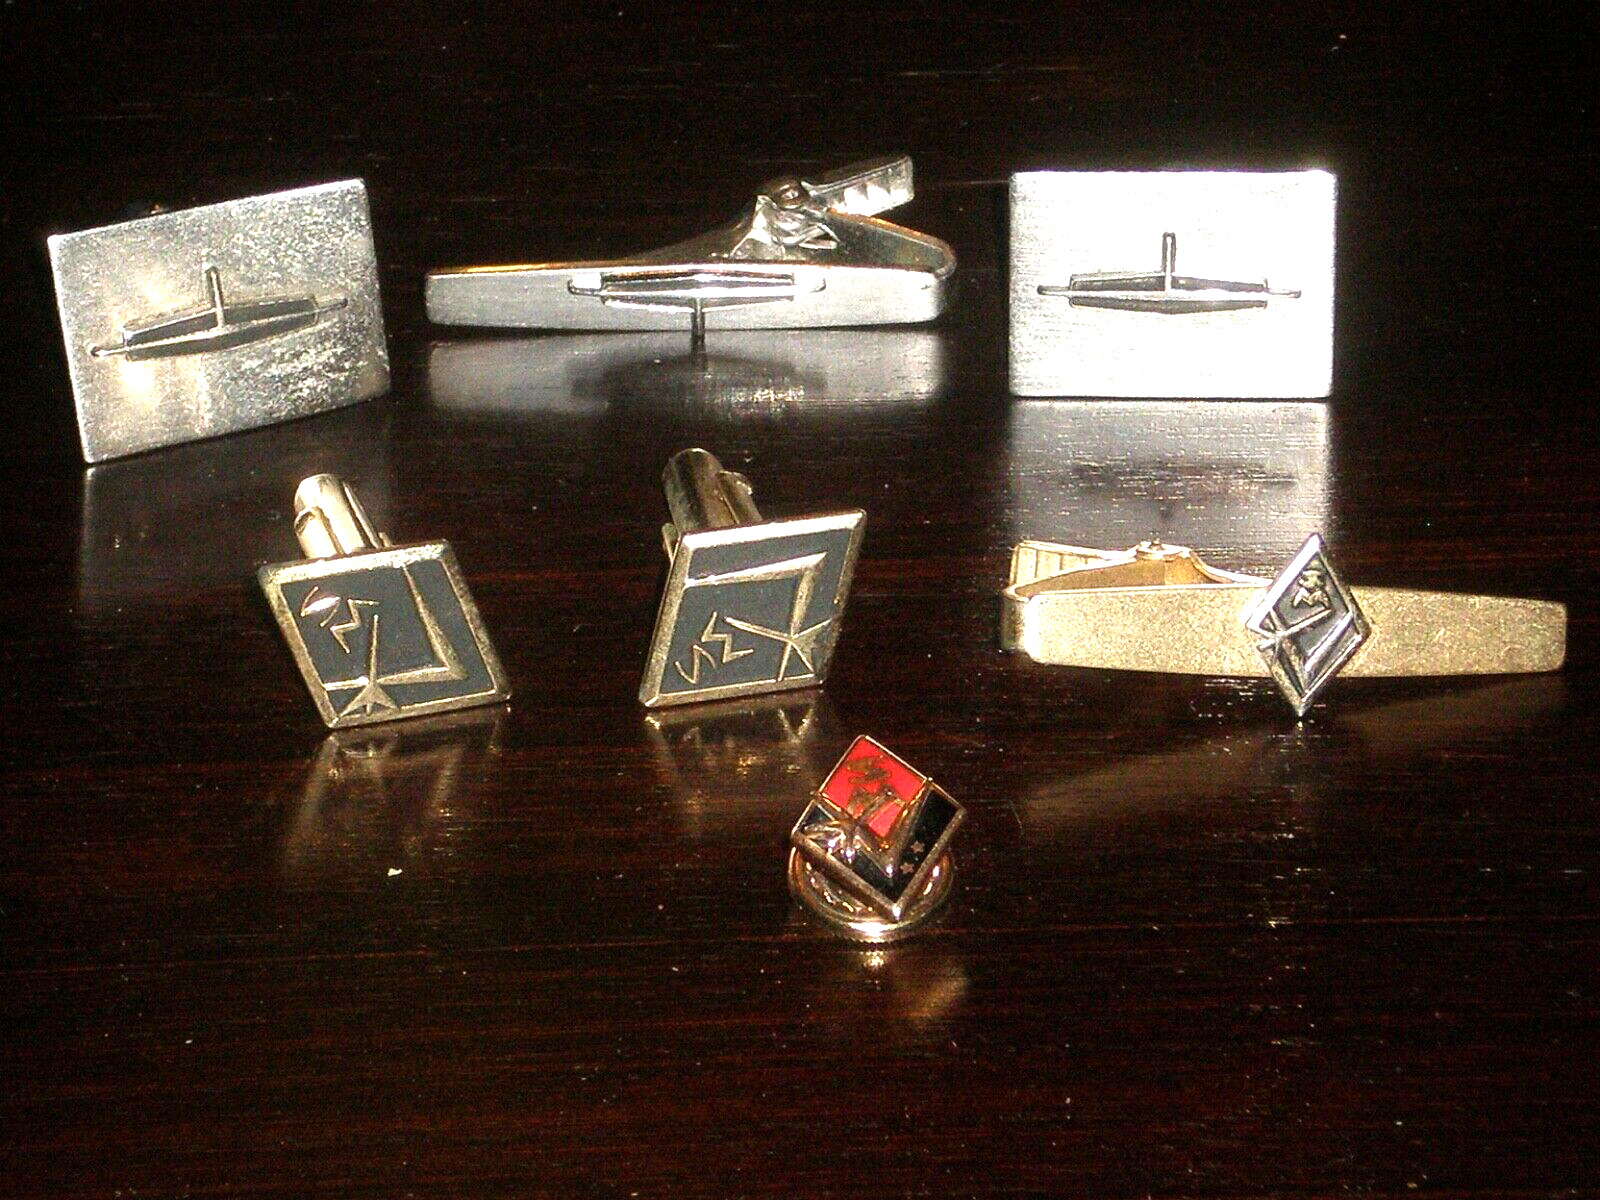 Oldsmobile Jewelry Tie Tacks Cuff Links & 10K Gold Pin 60s Promotional